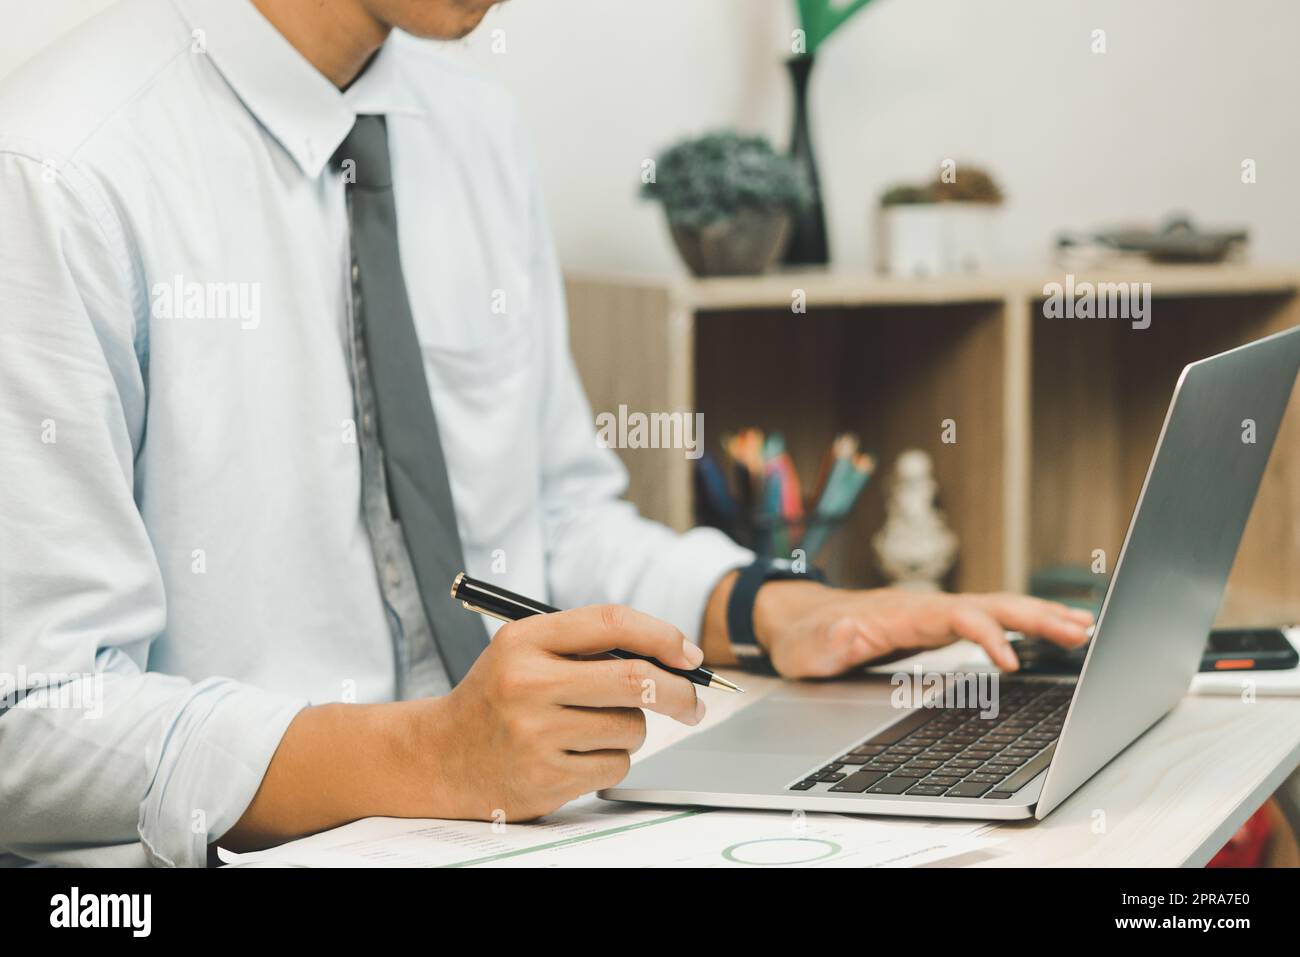 Hand man using keyboard computer laptop digital internet technology network browsing and shopping online and social media. Stock Photo